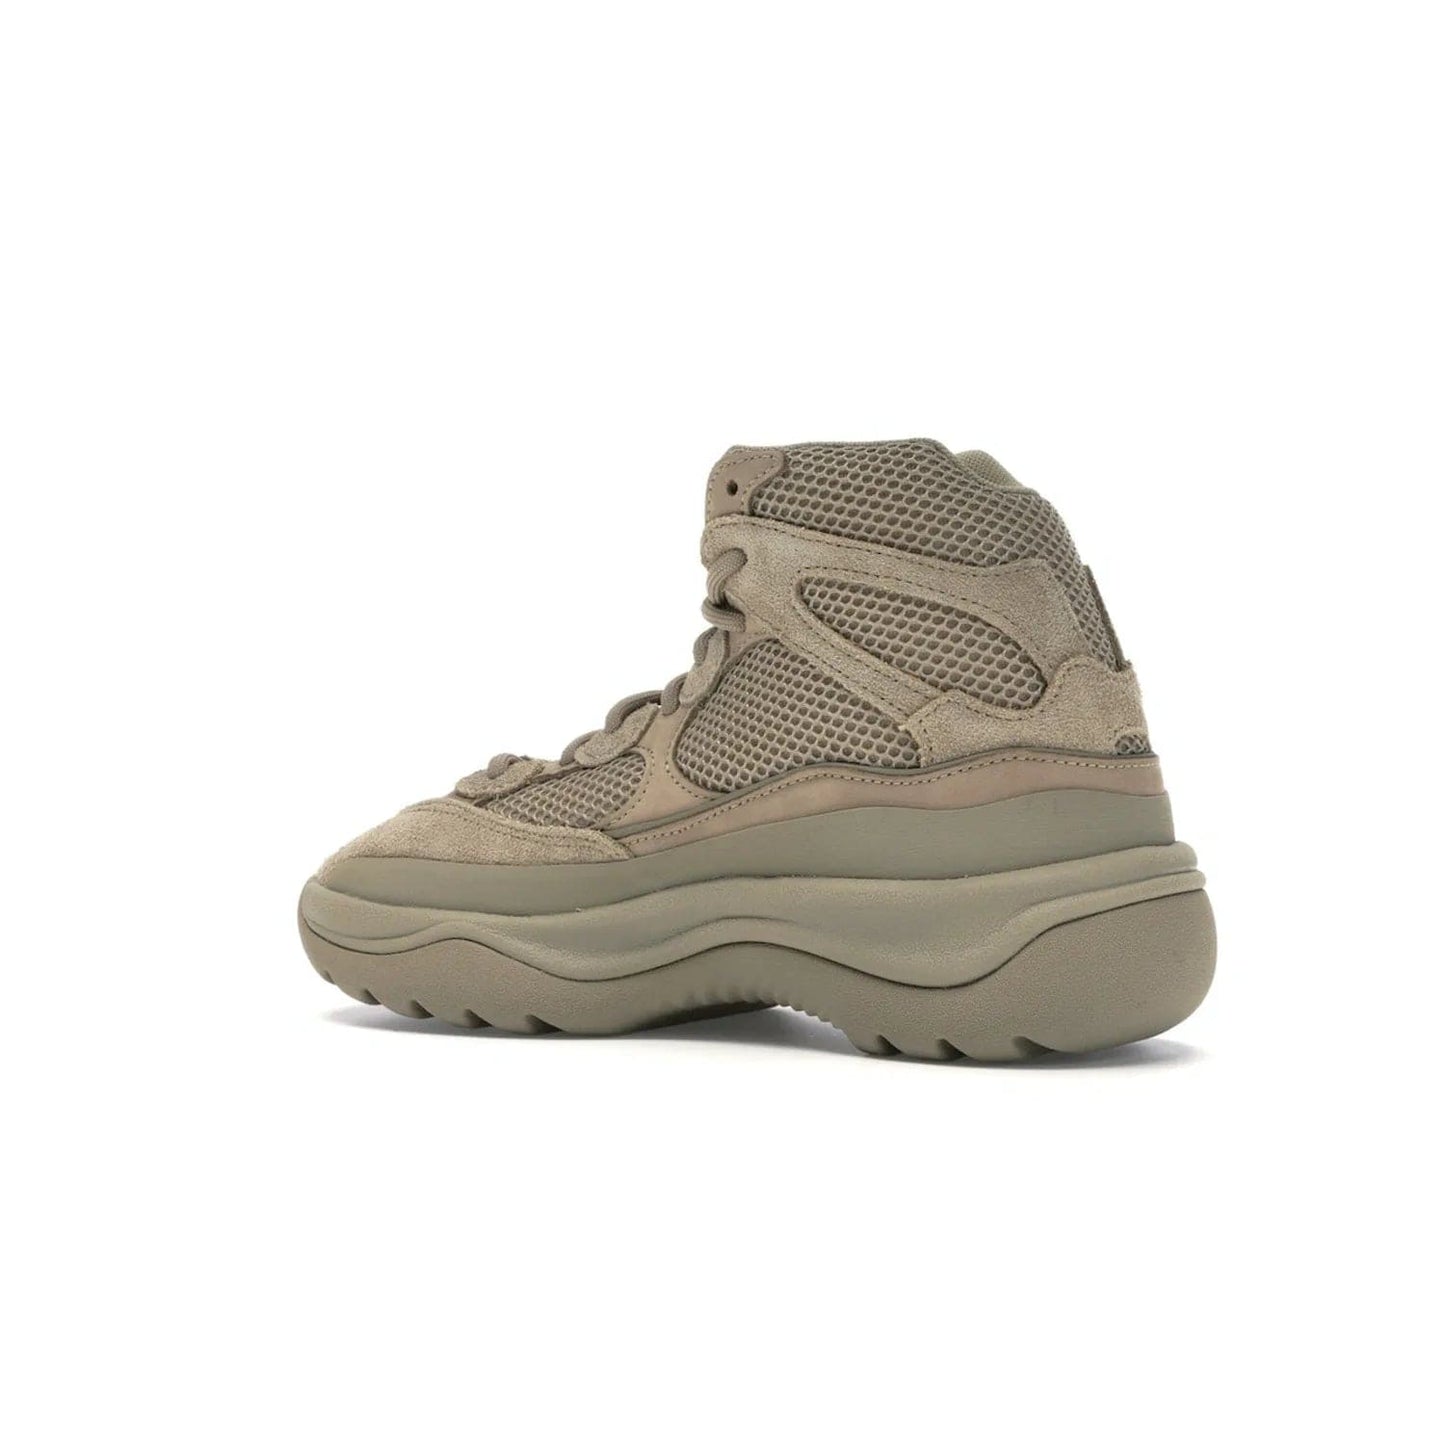 adidas Yeezy Desert Boot Rock - Image 22 - Only at www.BallersClubKickz.com - #
This season, make a fashion statement with the adidas Yeezy Desert Boot Rock. Nubuck and suede upper offers tonal style while the grooved sole provides traction and stability. Get yours in April 2019.